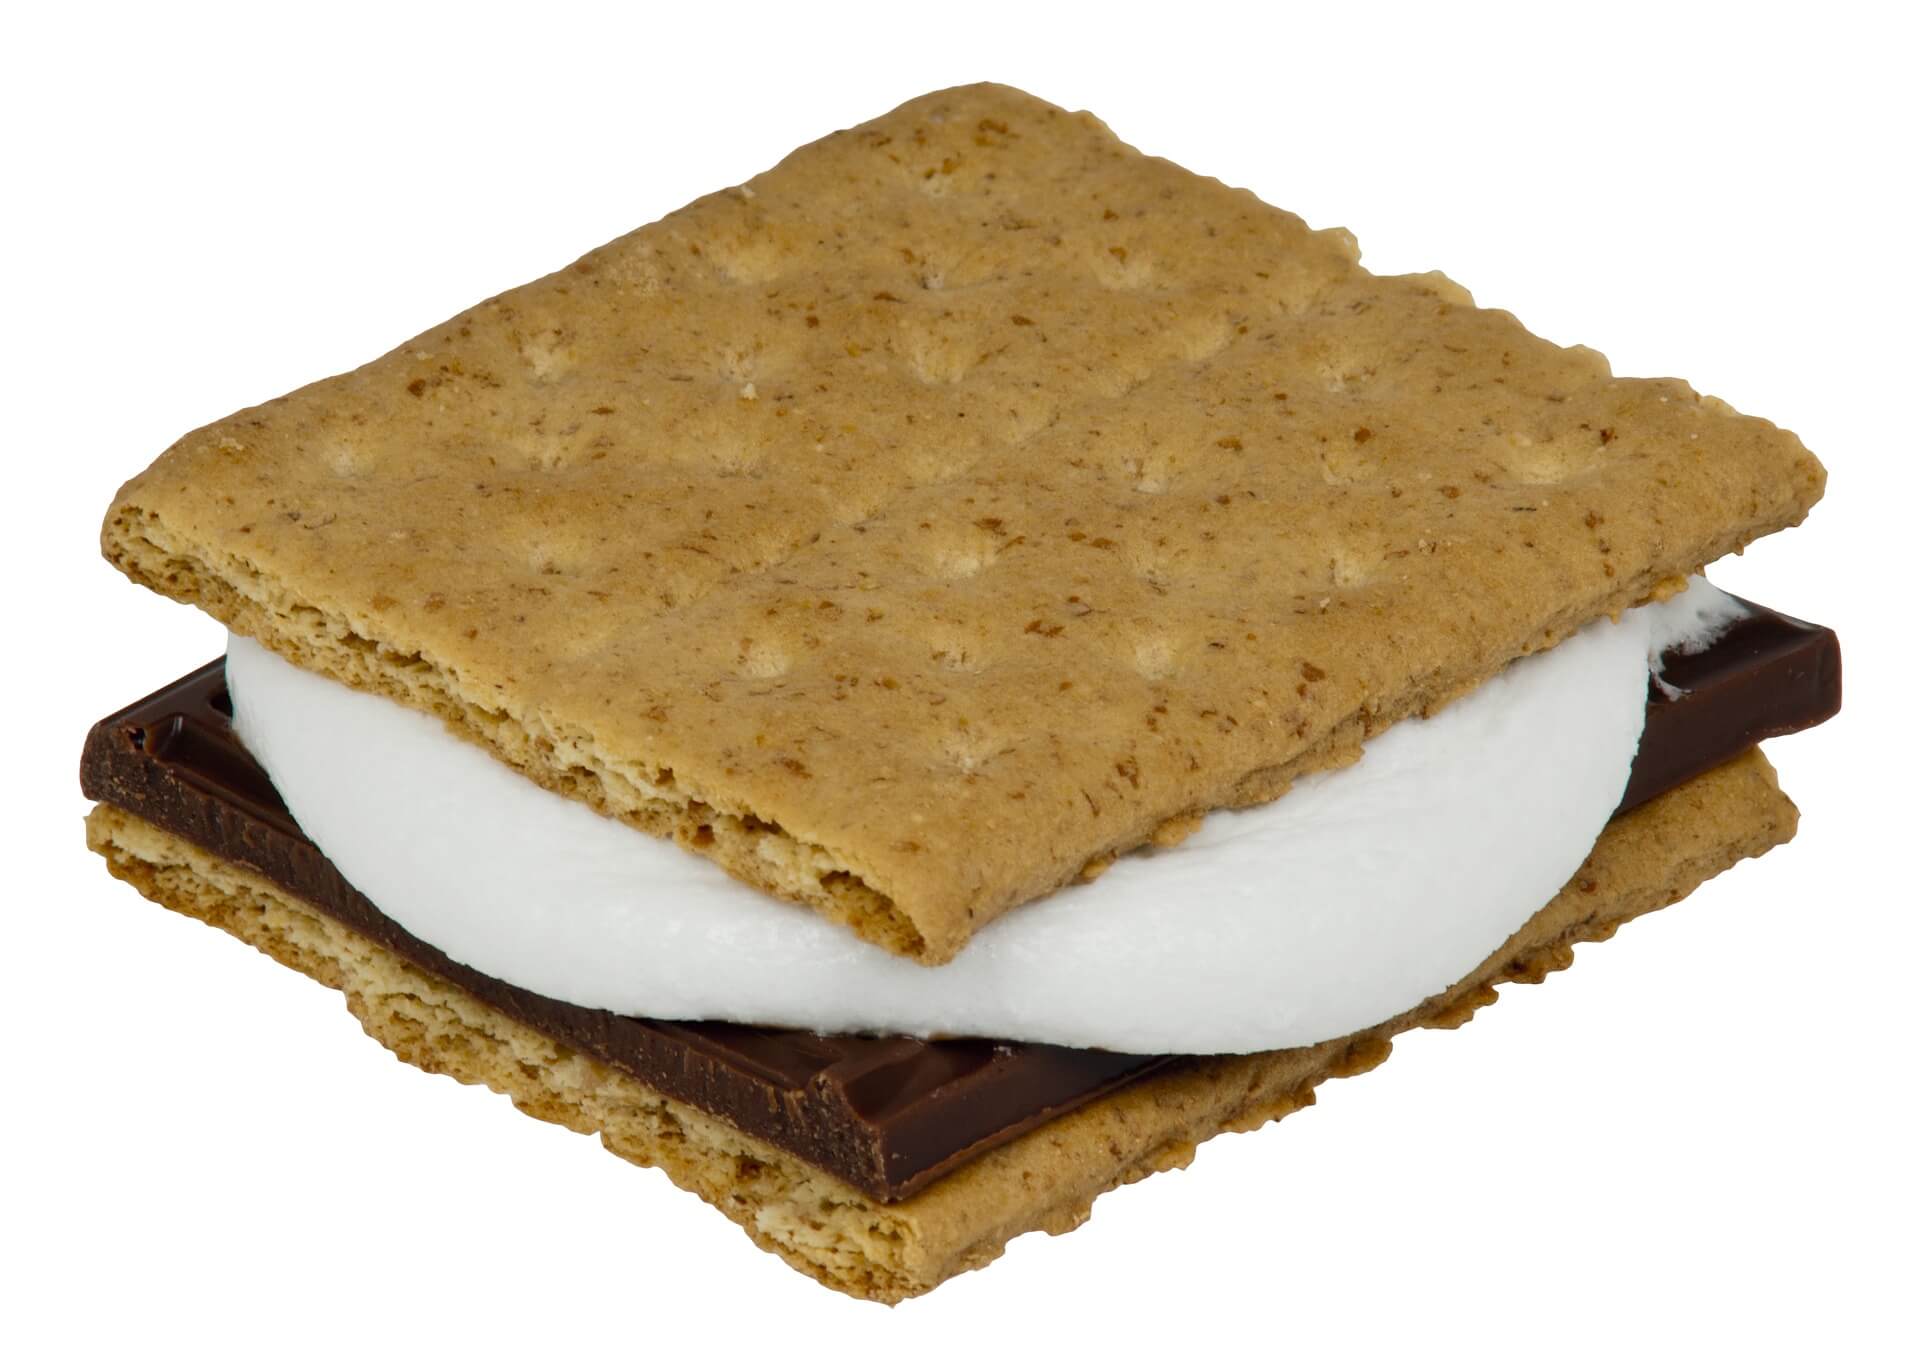 Adult S'mores